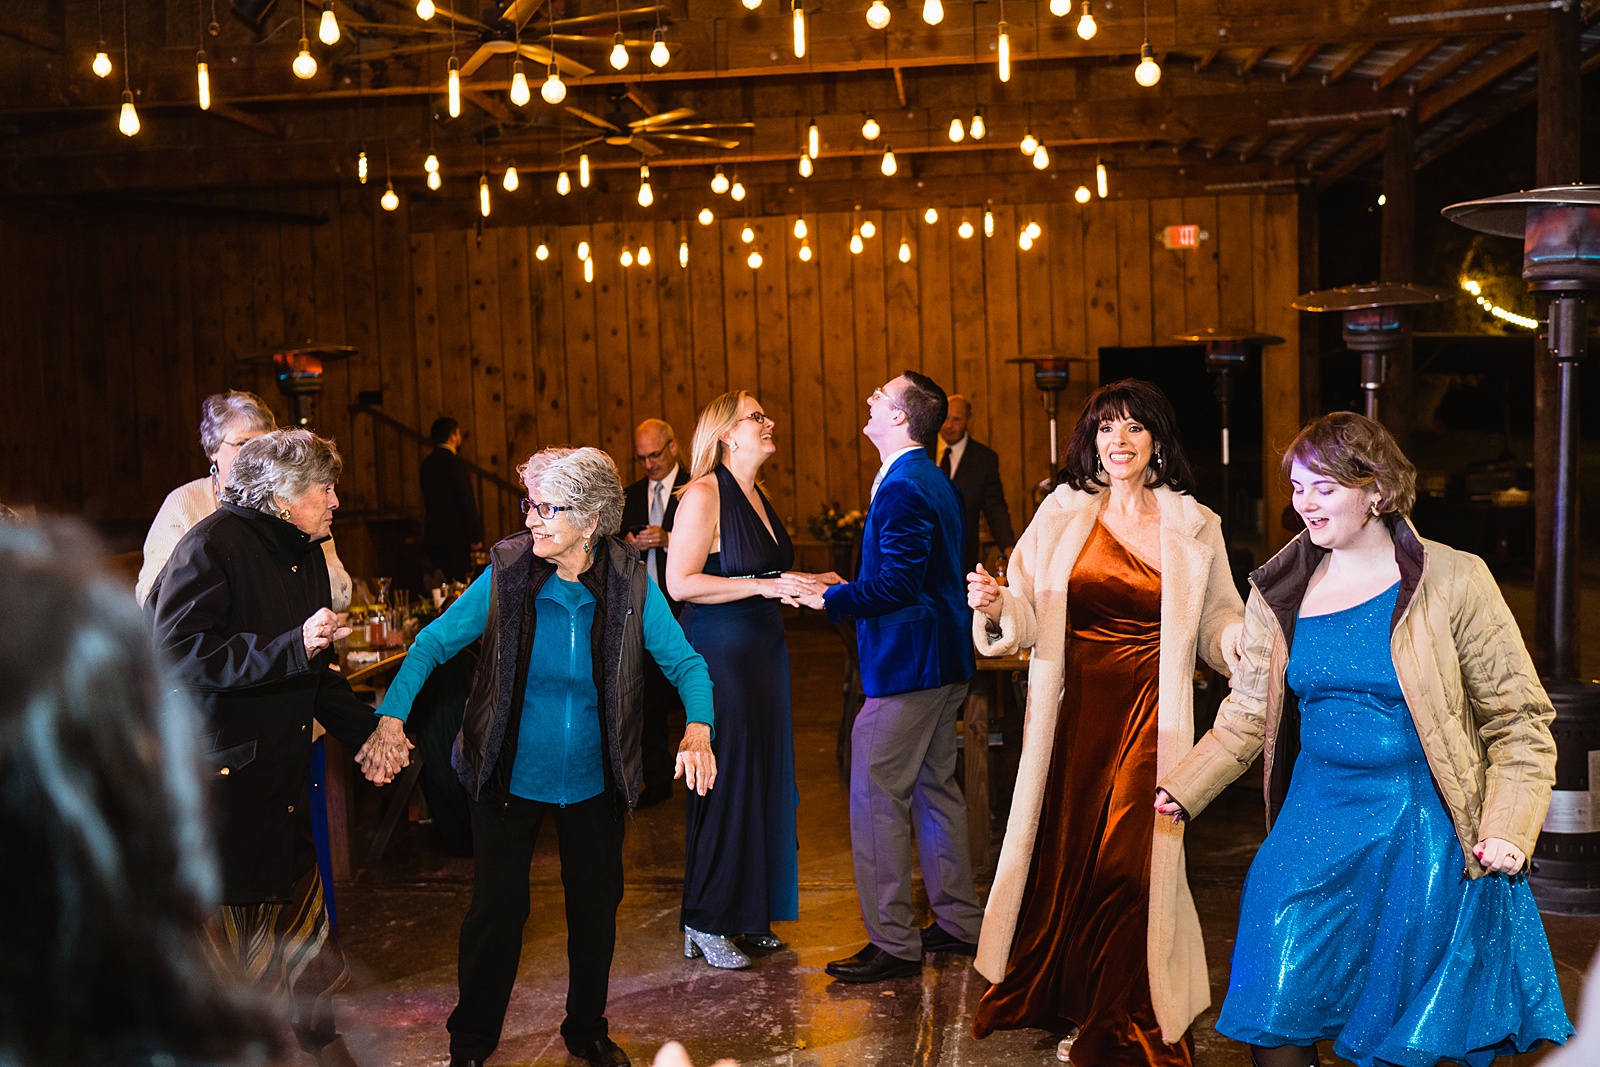 Guests dancing at Mortimer Farms wedding reception by Prescott wedding photographer PMA Photography